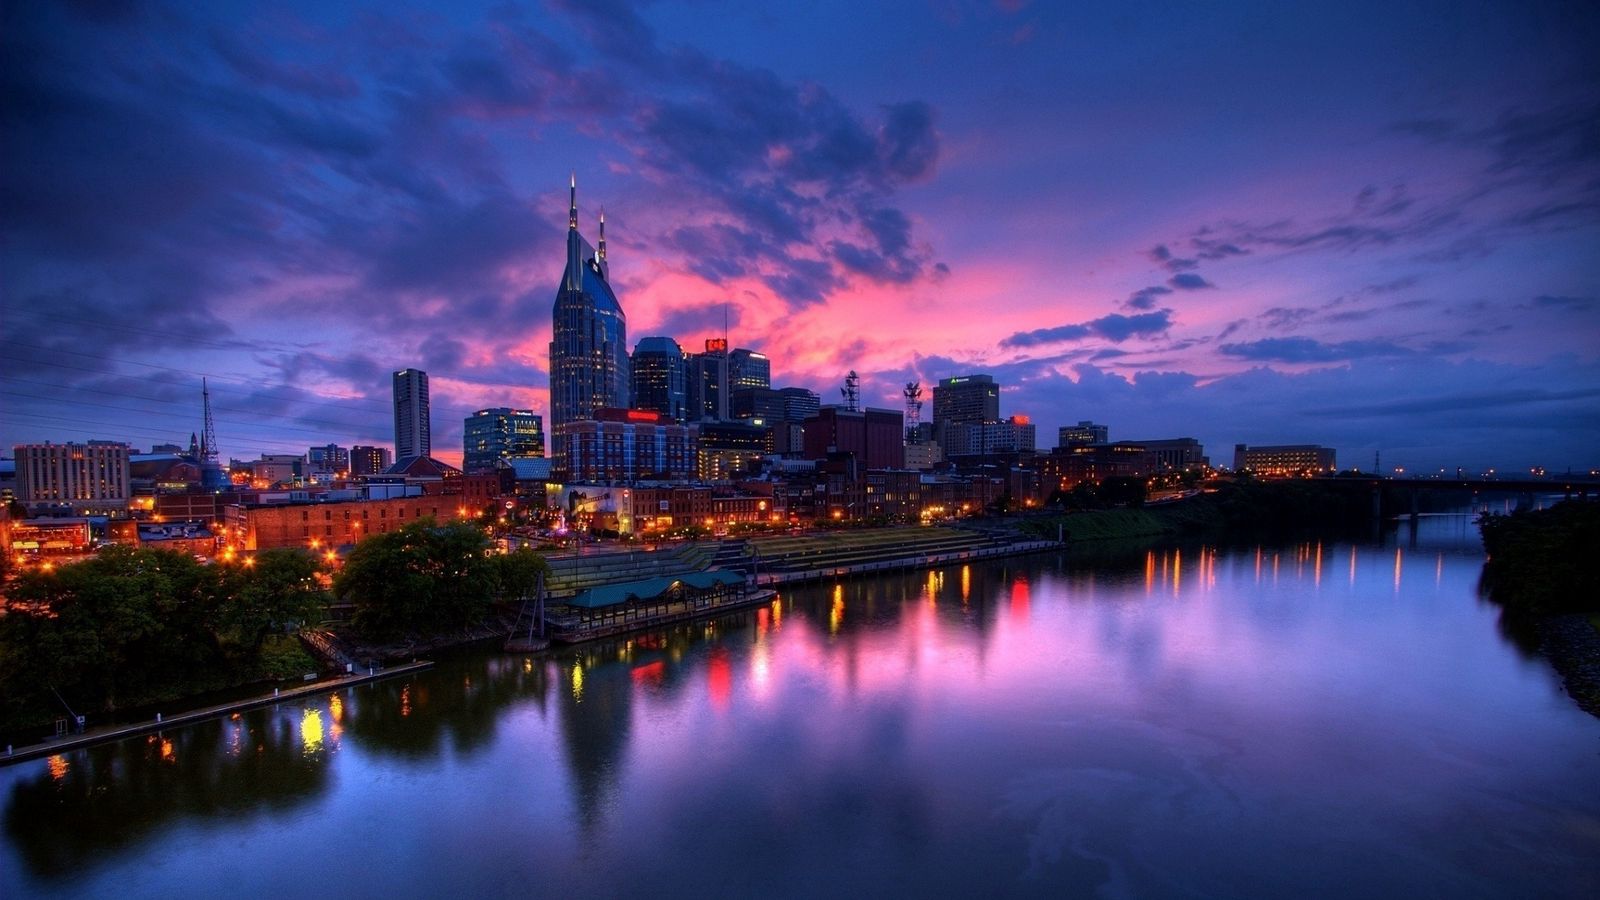 Download wallpaper 1600x900 purple sunset, city, buildings, skyscrapers, beach, night, river widescreen 16:9 HD background